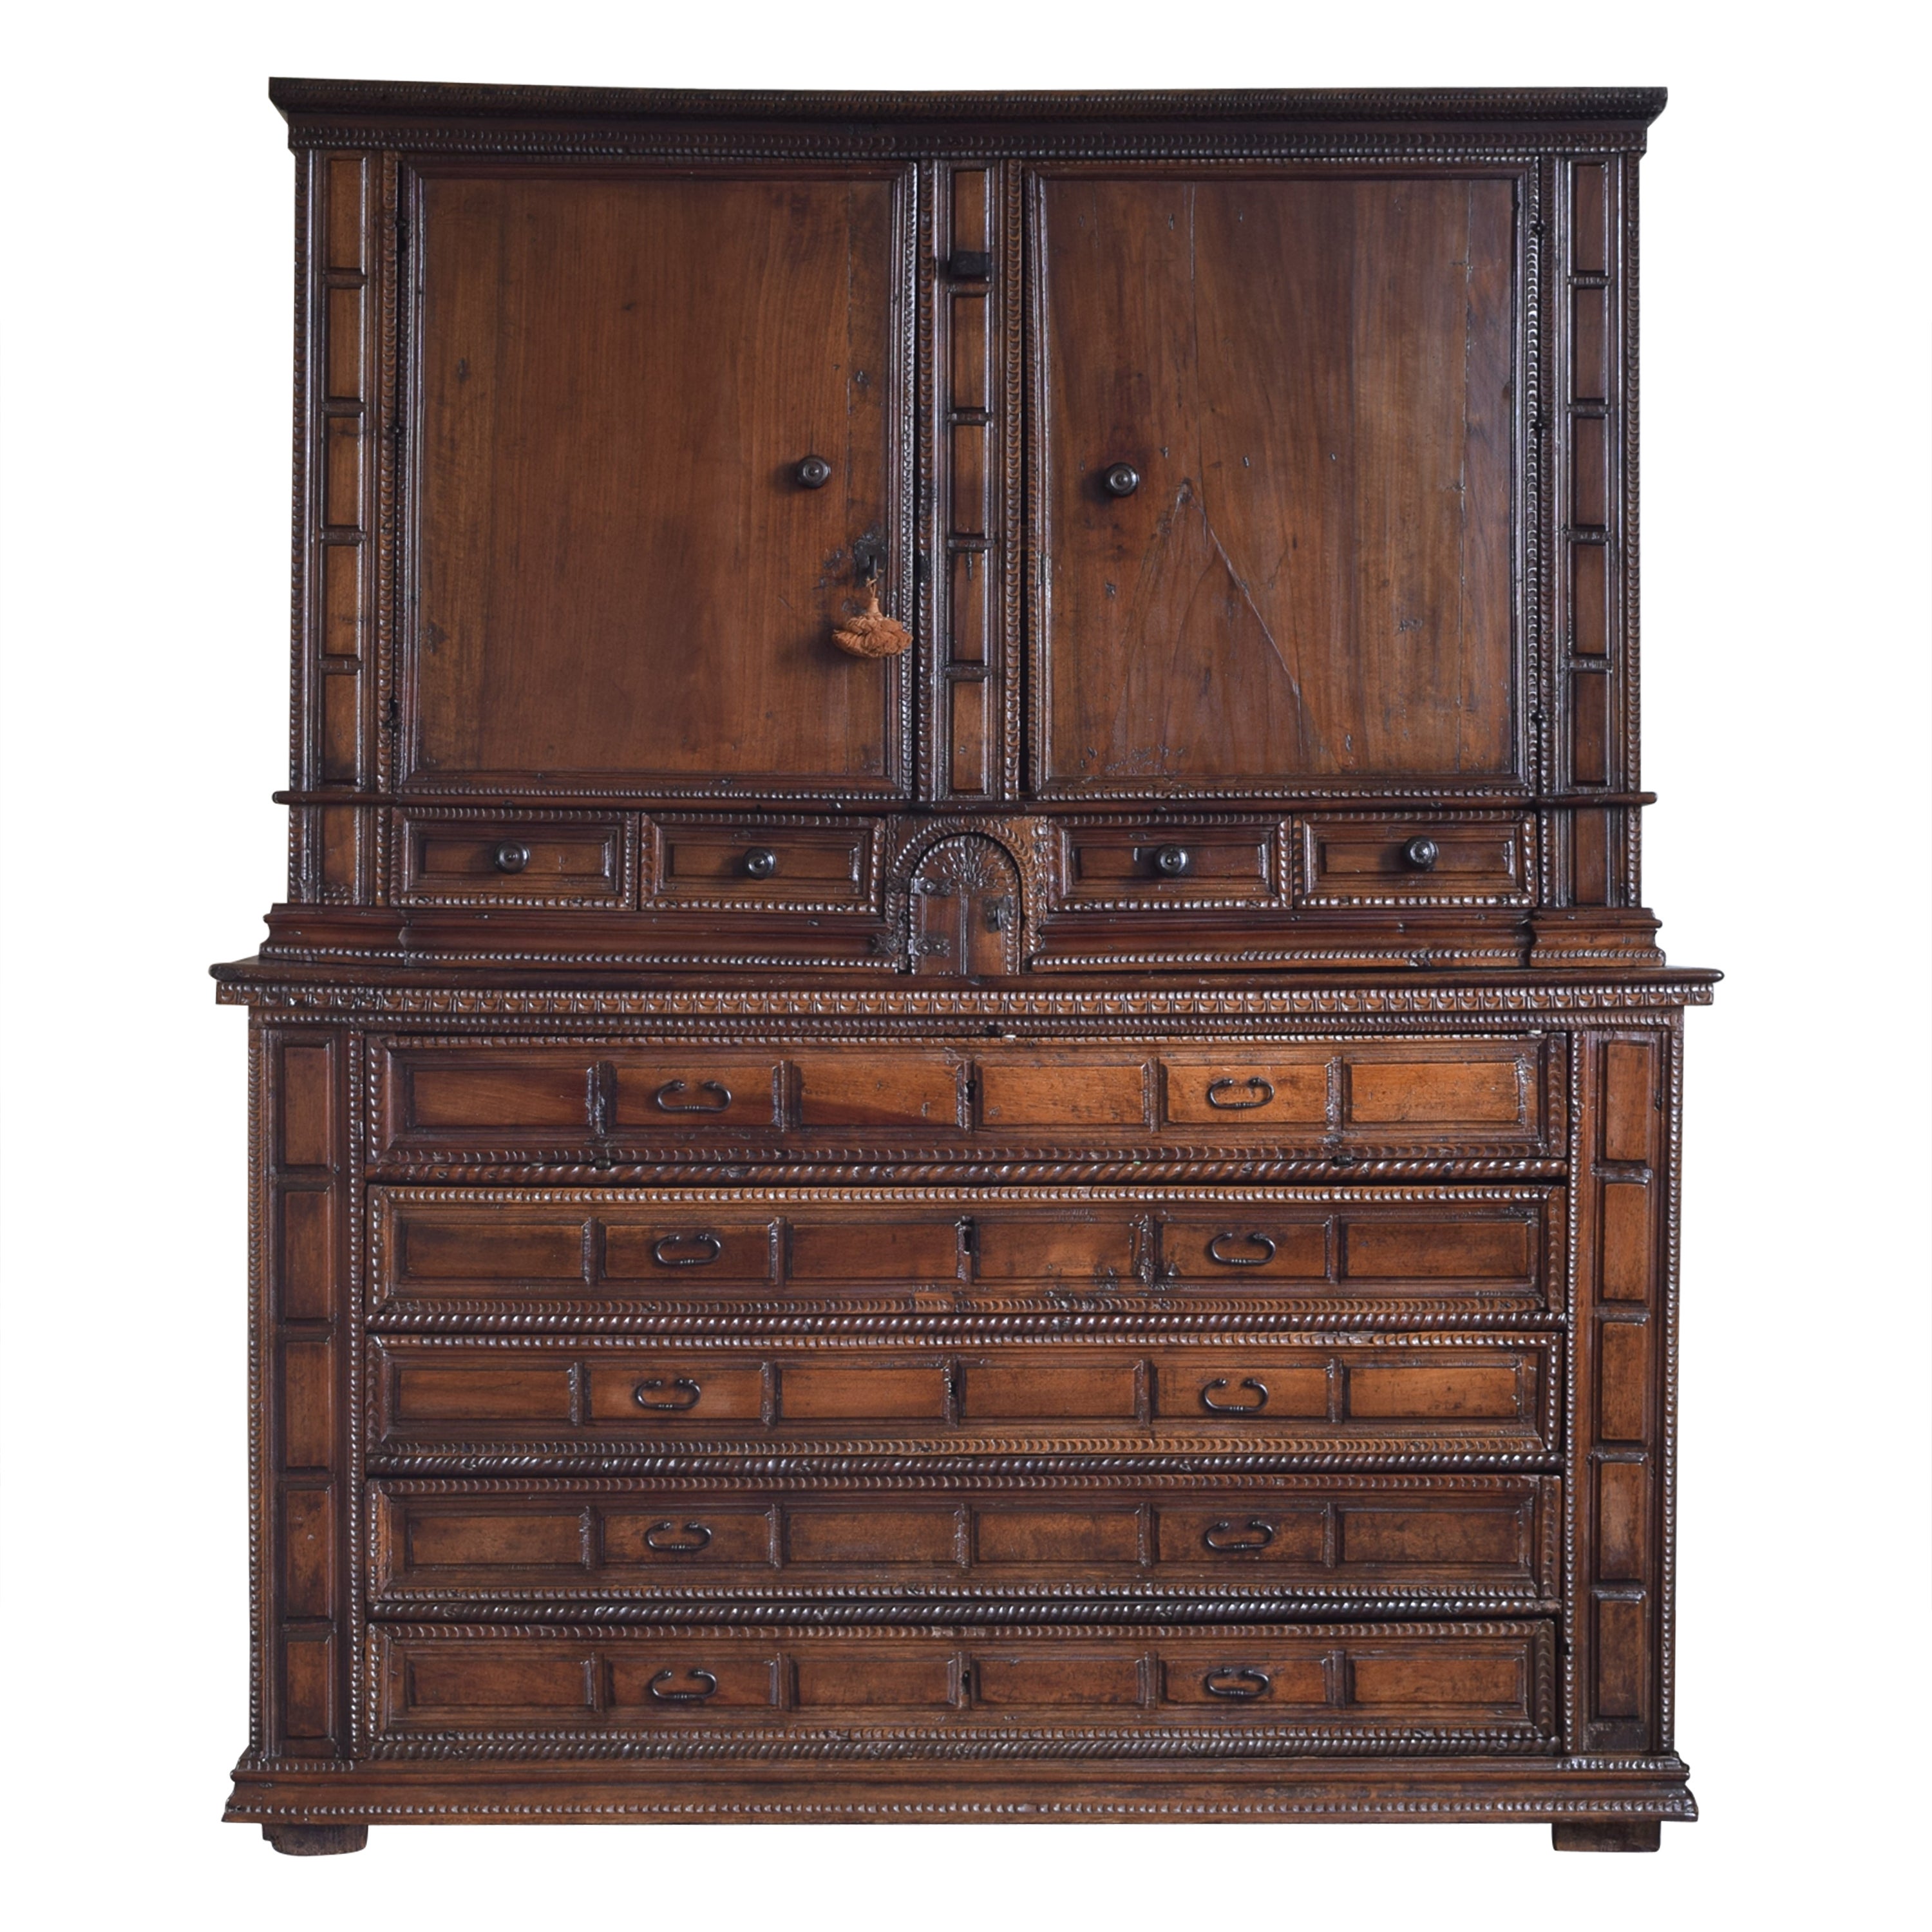 Italian Baroque Period Carved Walnut Sacristy Cabinet, Mid to Late 17th Century